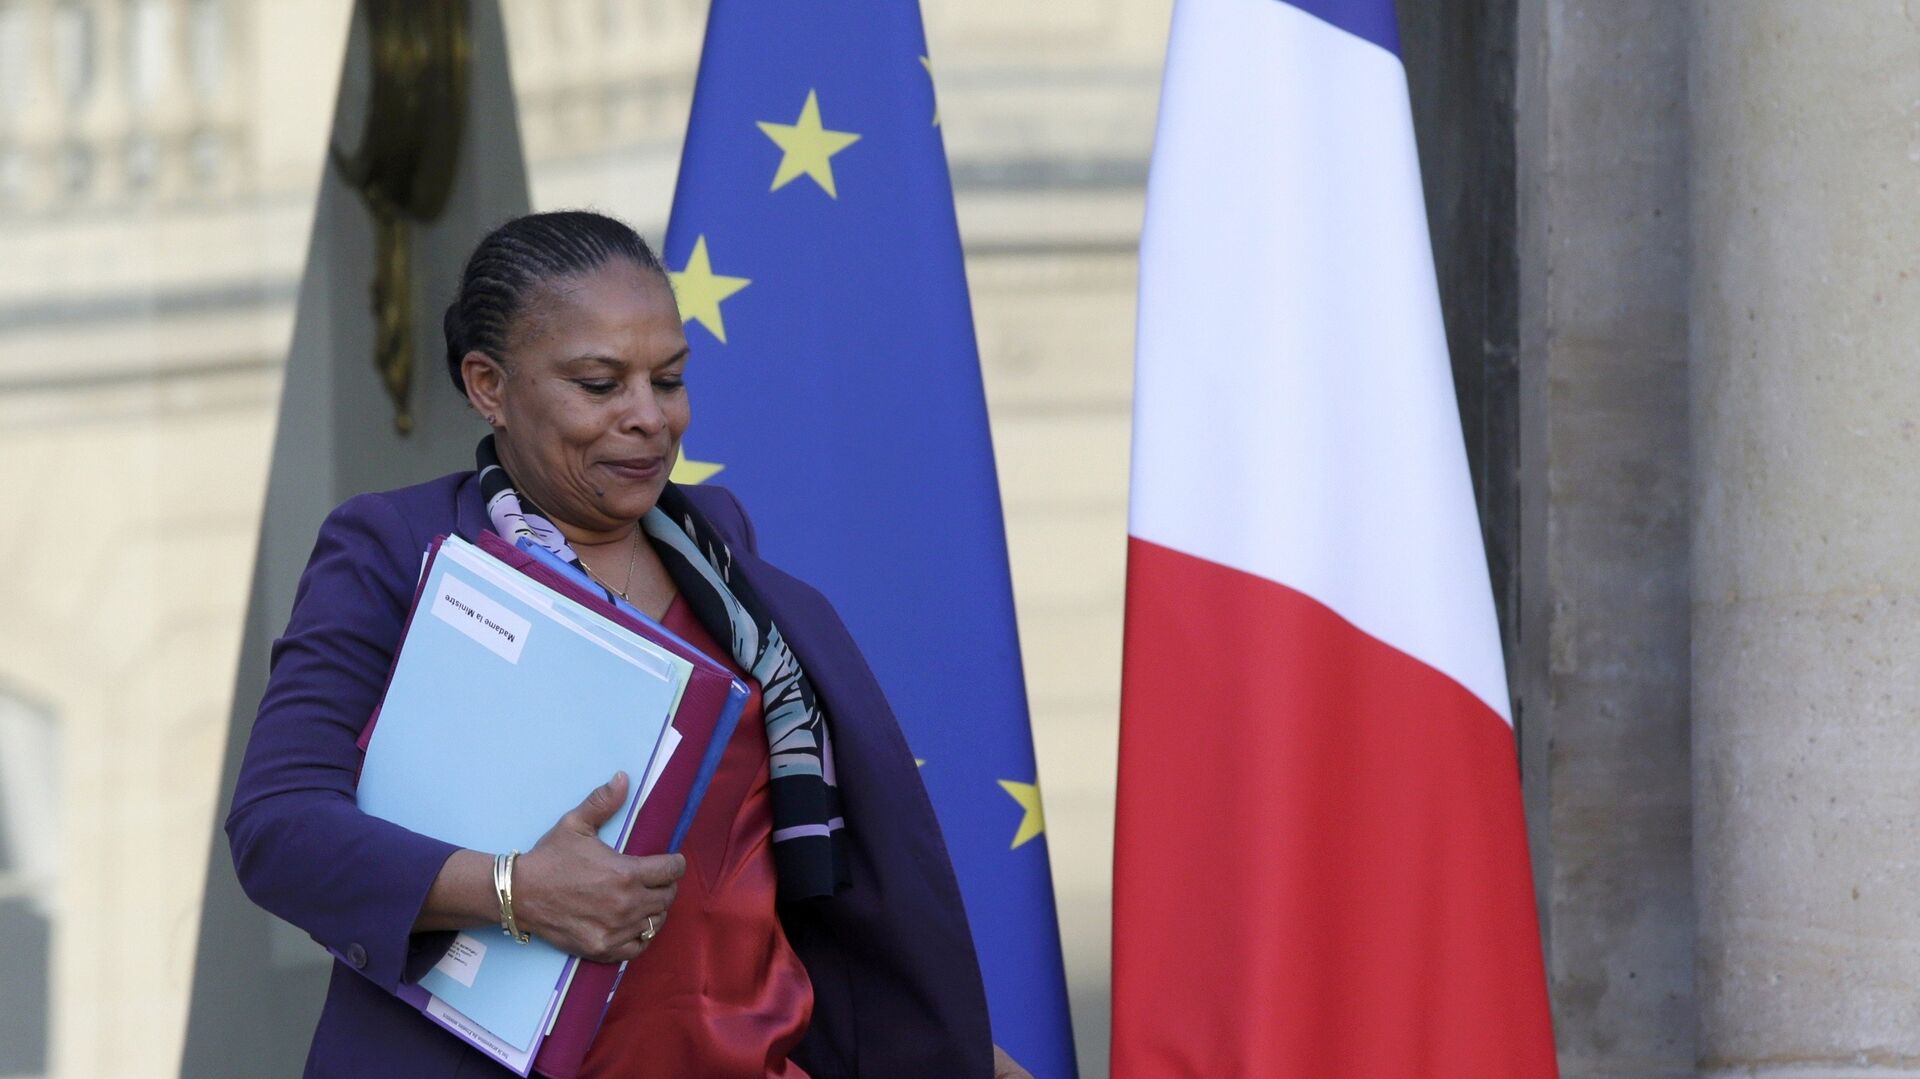 File picture shows French Justice Minister Christiane Taubira as she leaves the Elysee palace in Paris, France, December 23, 2015, following the weekly cabinet meeting. - Sputnik Afrique, 1920, 17.12.2021